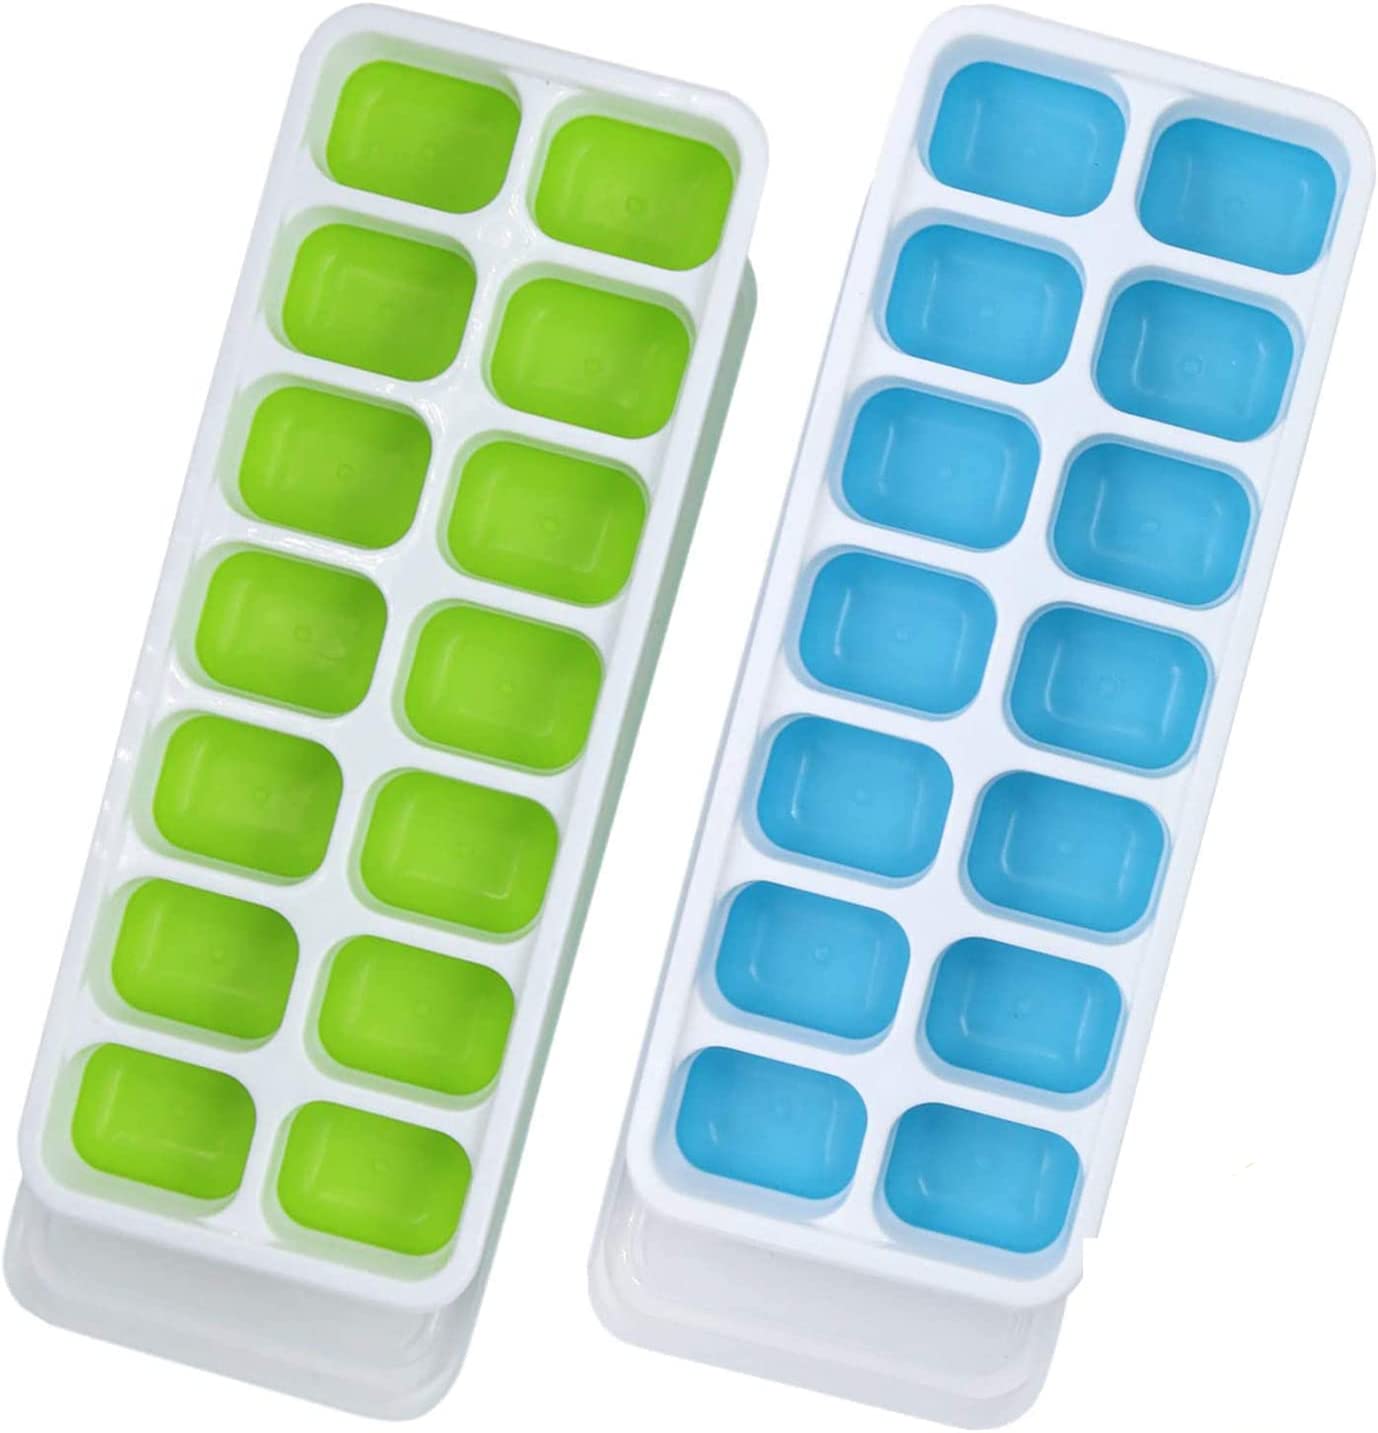 Creative Pop Out Ice Tray Set of 2